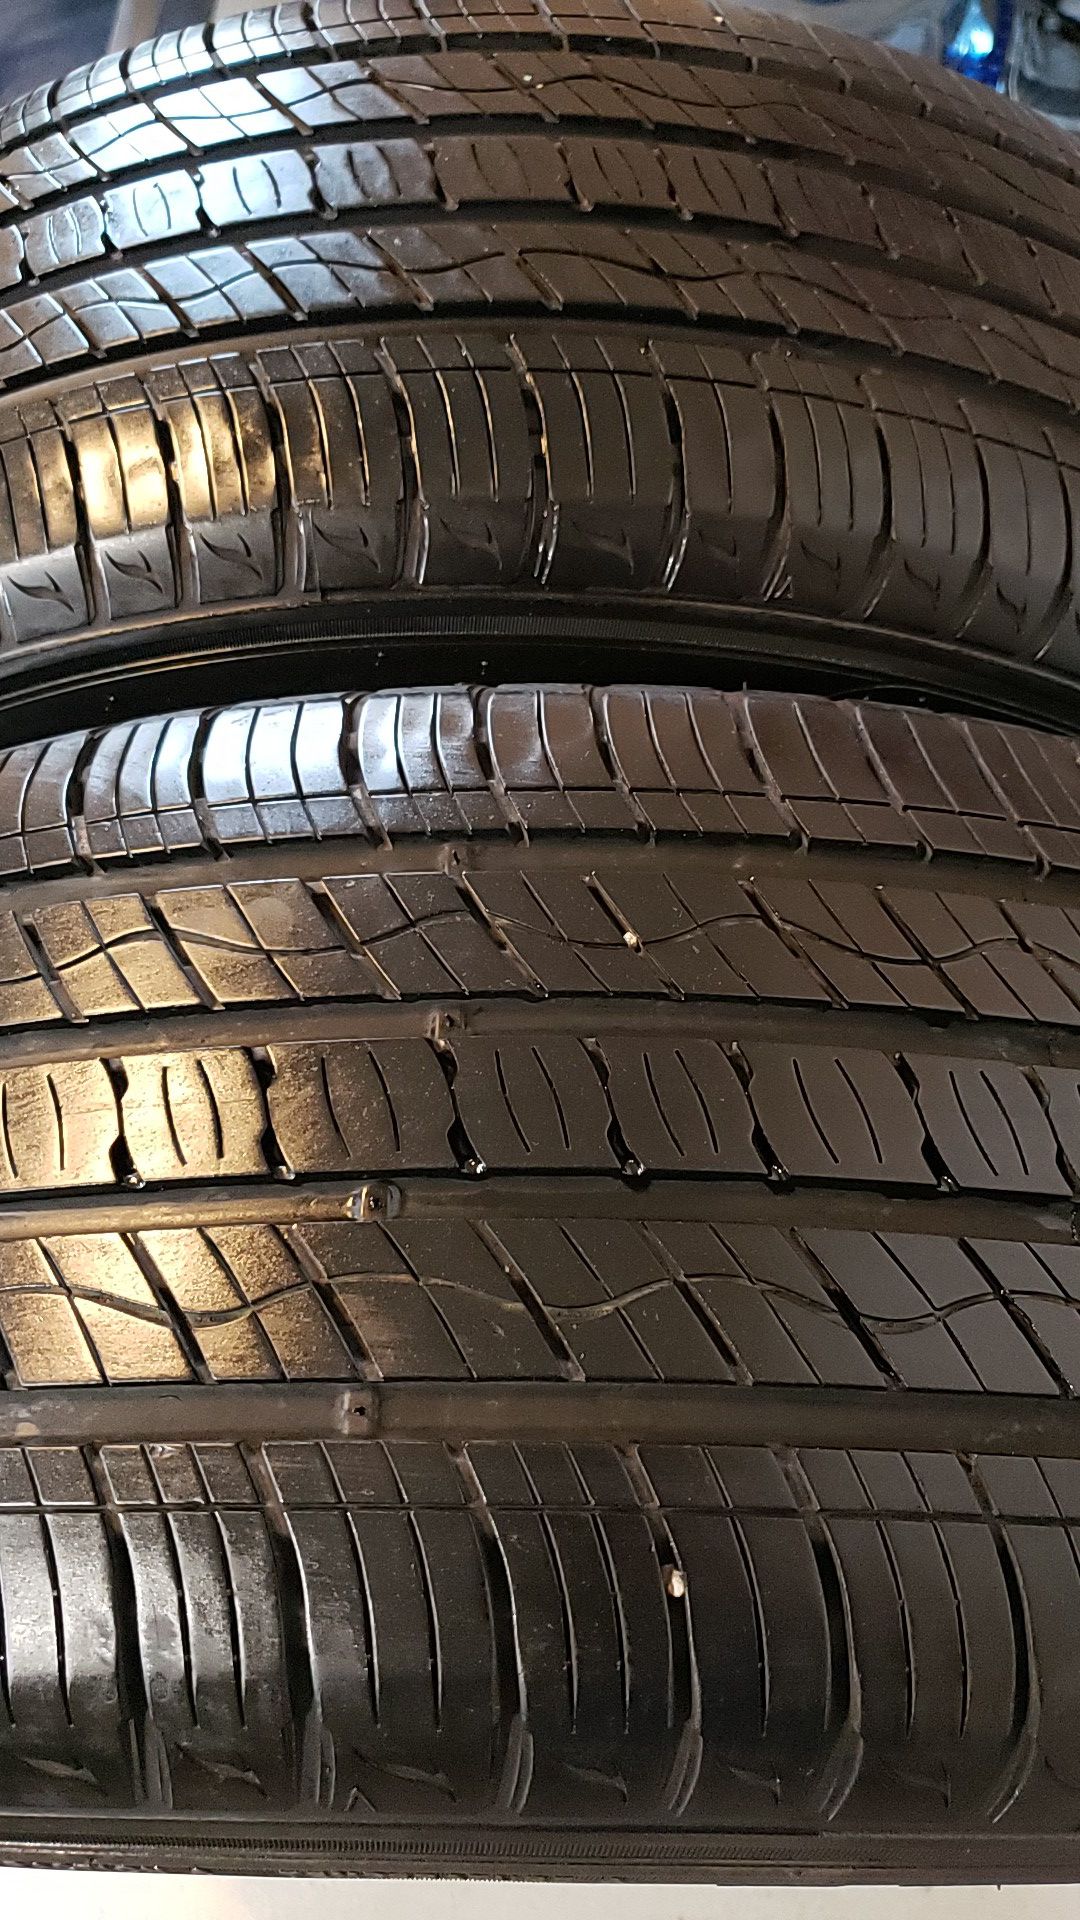 Kumho in good condition 2 tires 245 60 18 70% tread